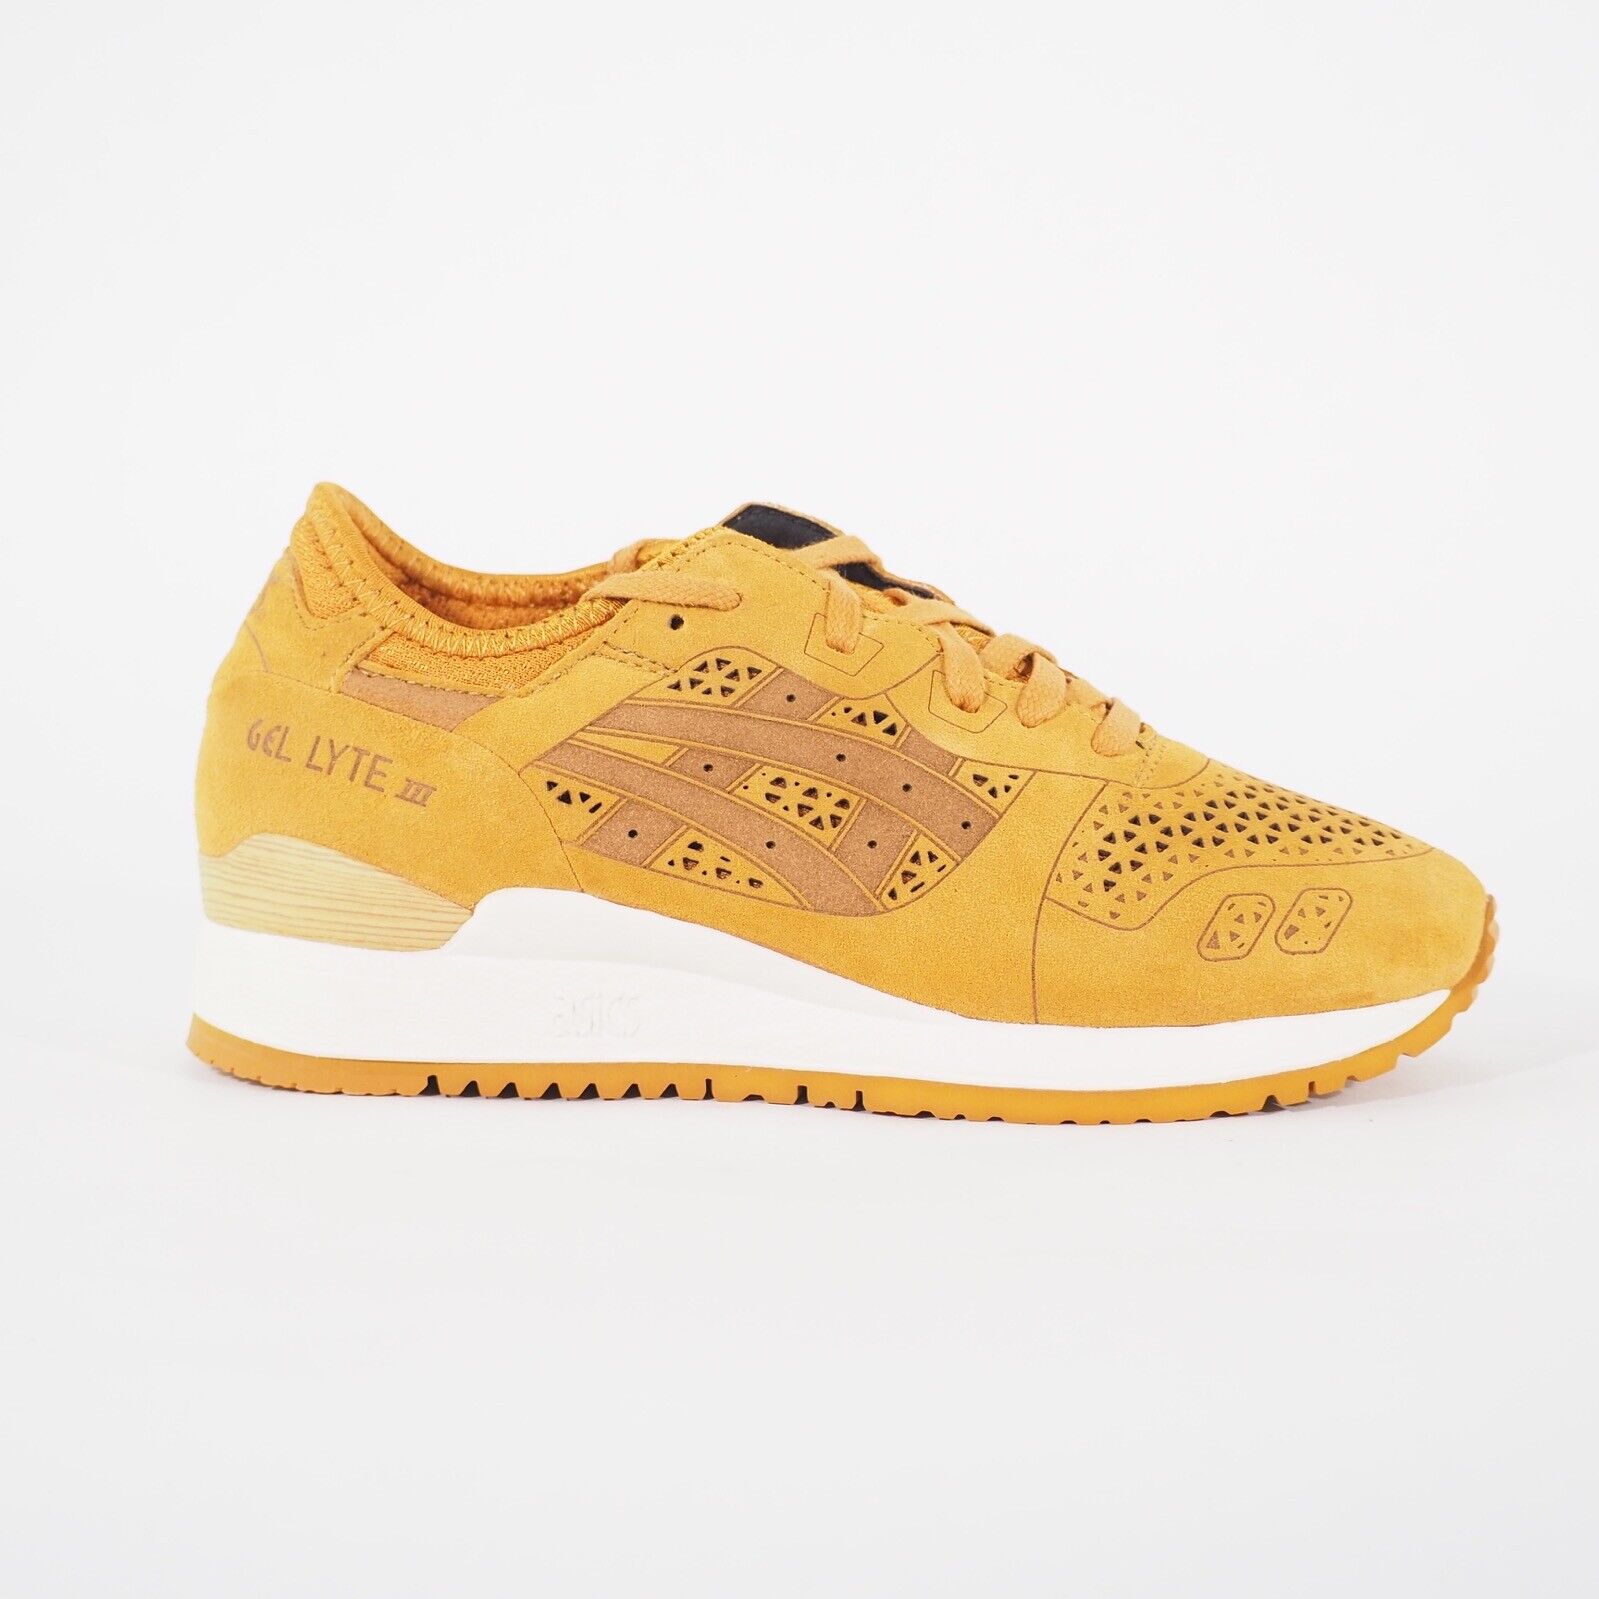 Junior Asics Gel-Lyte 3 LC H5E3L Tan Lace Up Casual Walking Sports Trainers